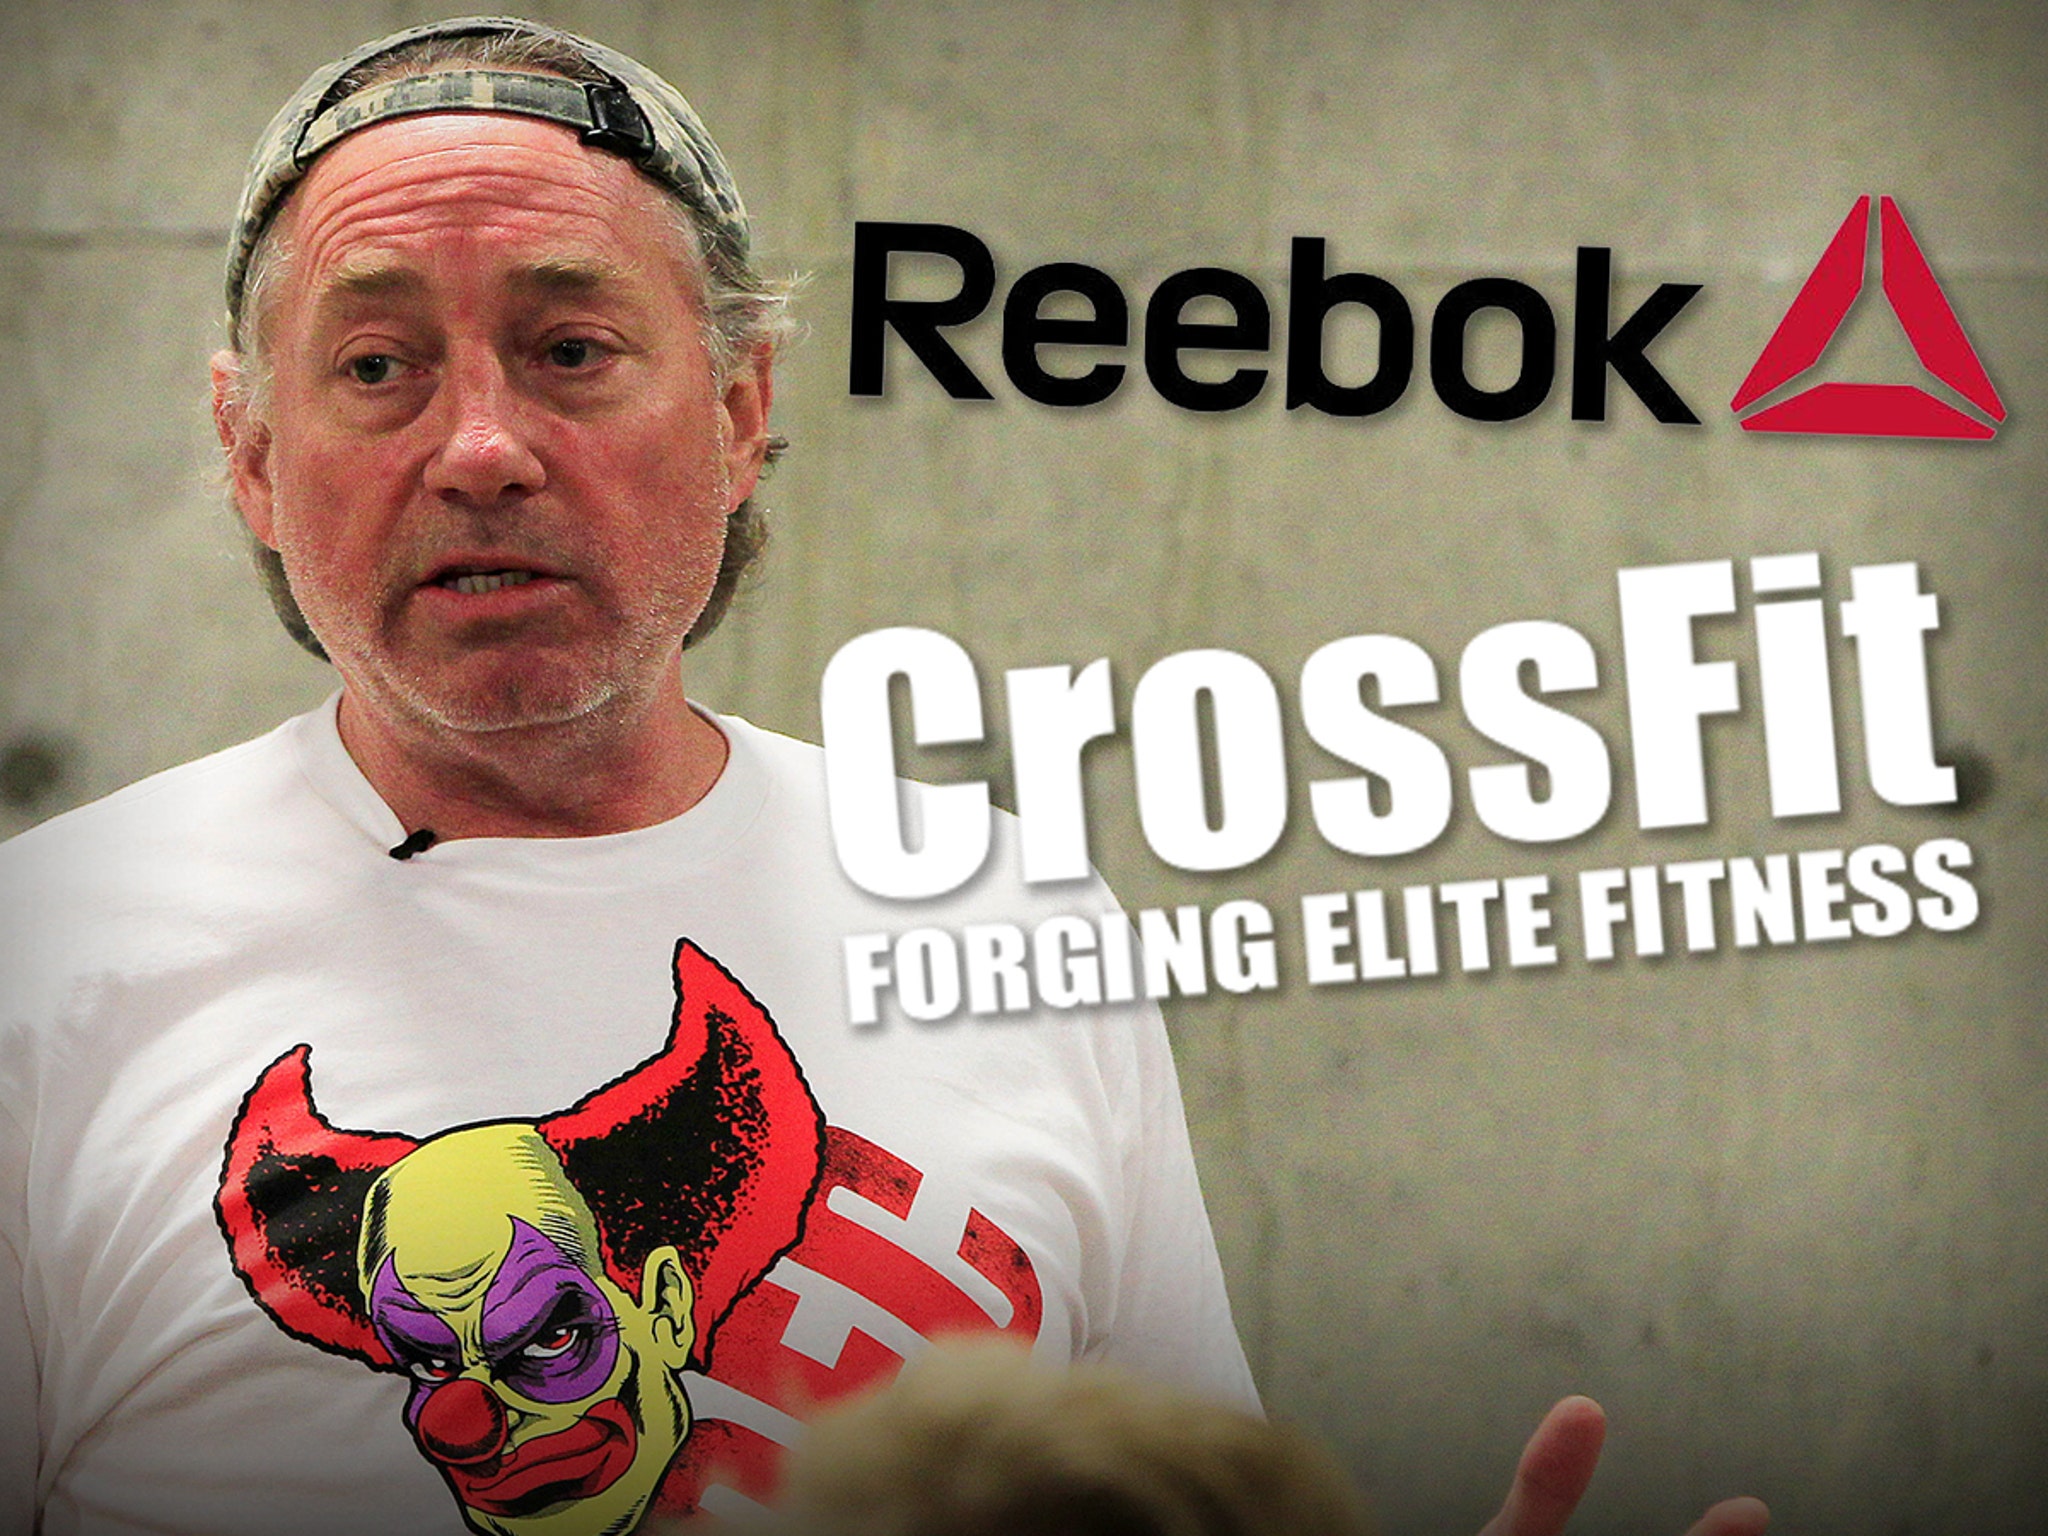 Why does CrossFit sound so Gay?. I've overheard a Cross-Fitter hard…, by  George-Aboutlifting